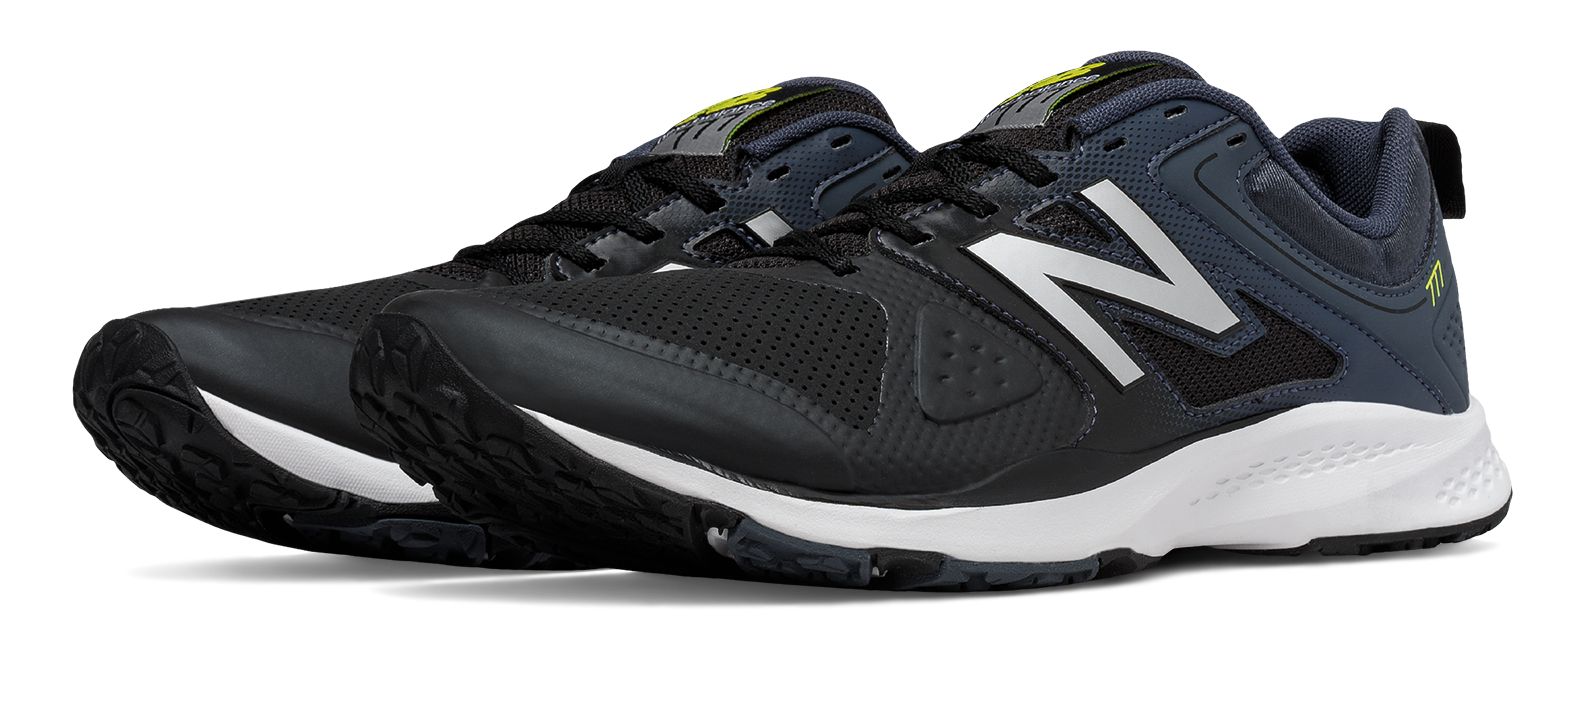 New Balance MX777-V2 on Sale - Discounts Up to 43% Off on MX777BF at Joe's New  Balance Outlet